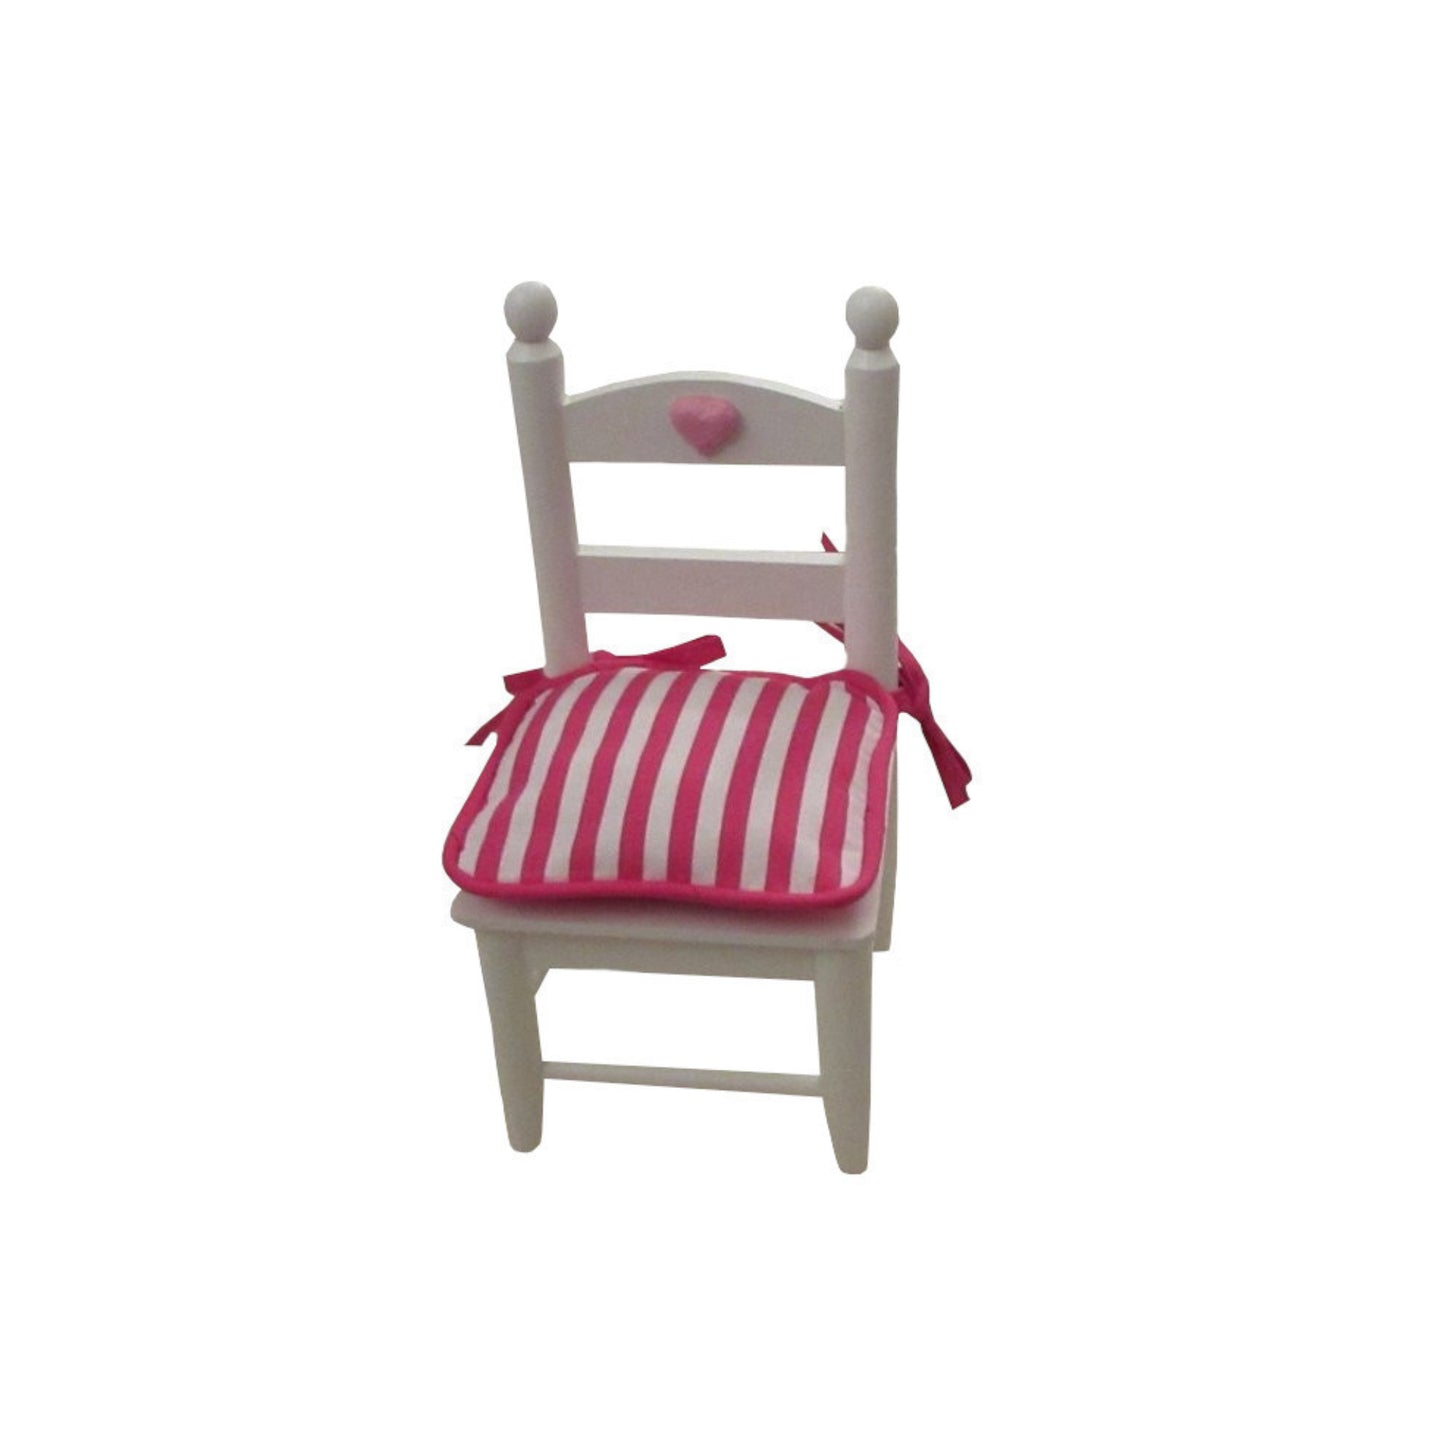 Pink and White Stripes Doll Chair Cushion for 18-inch dolls